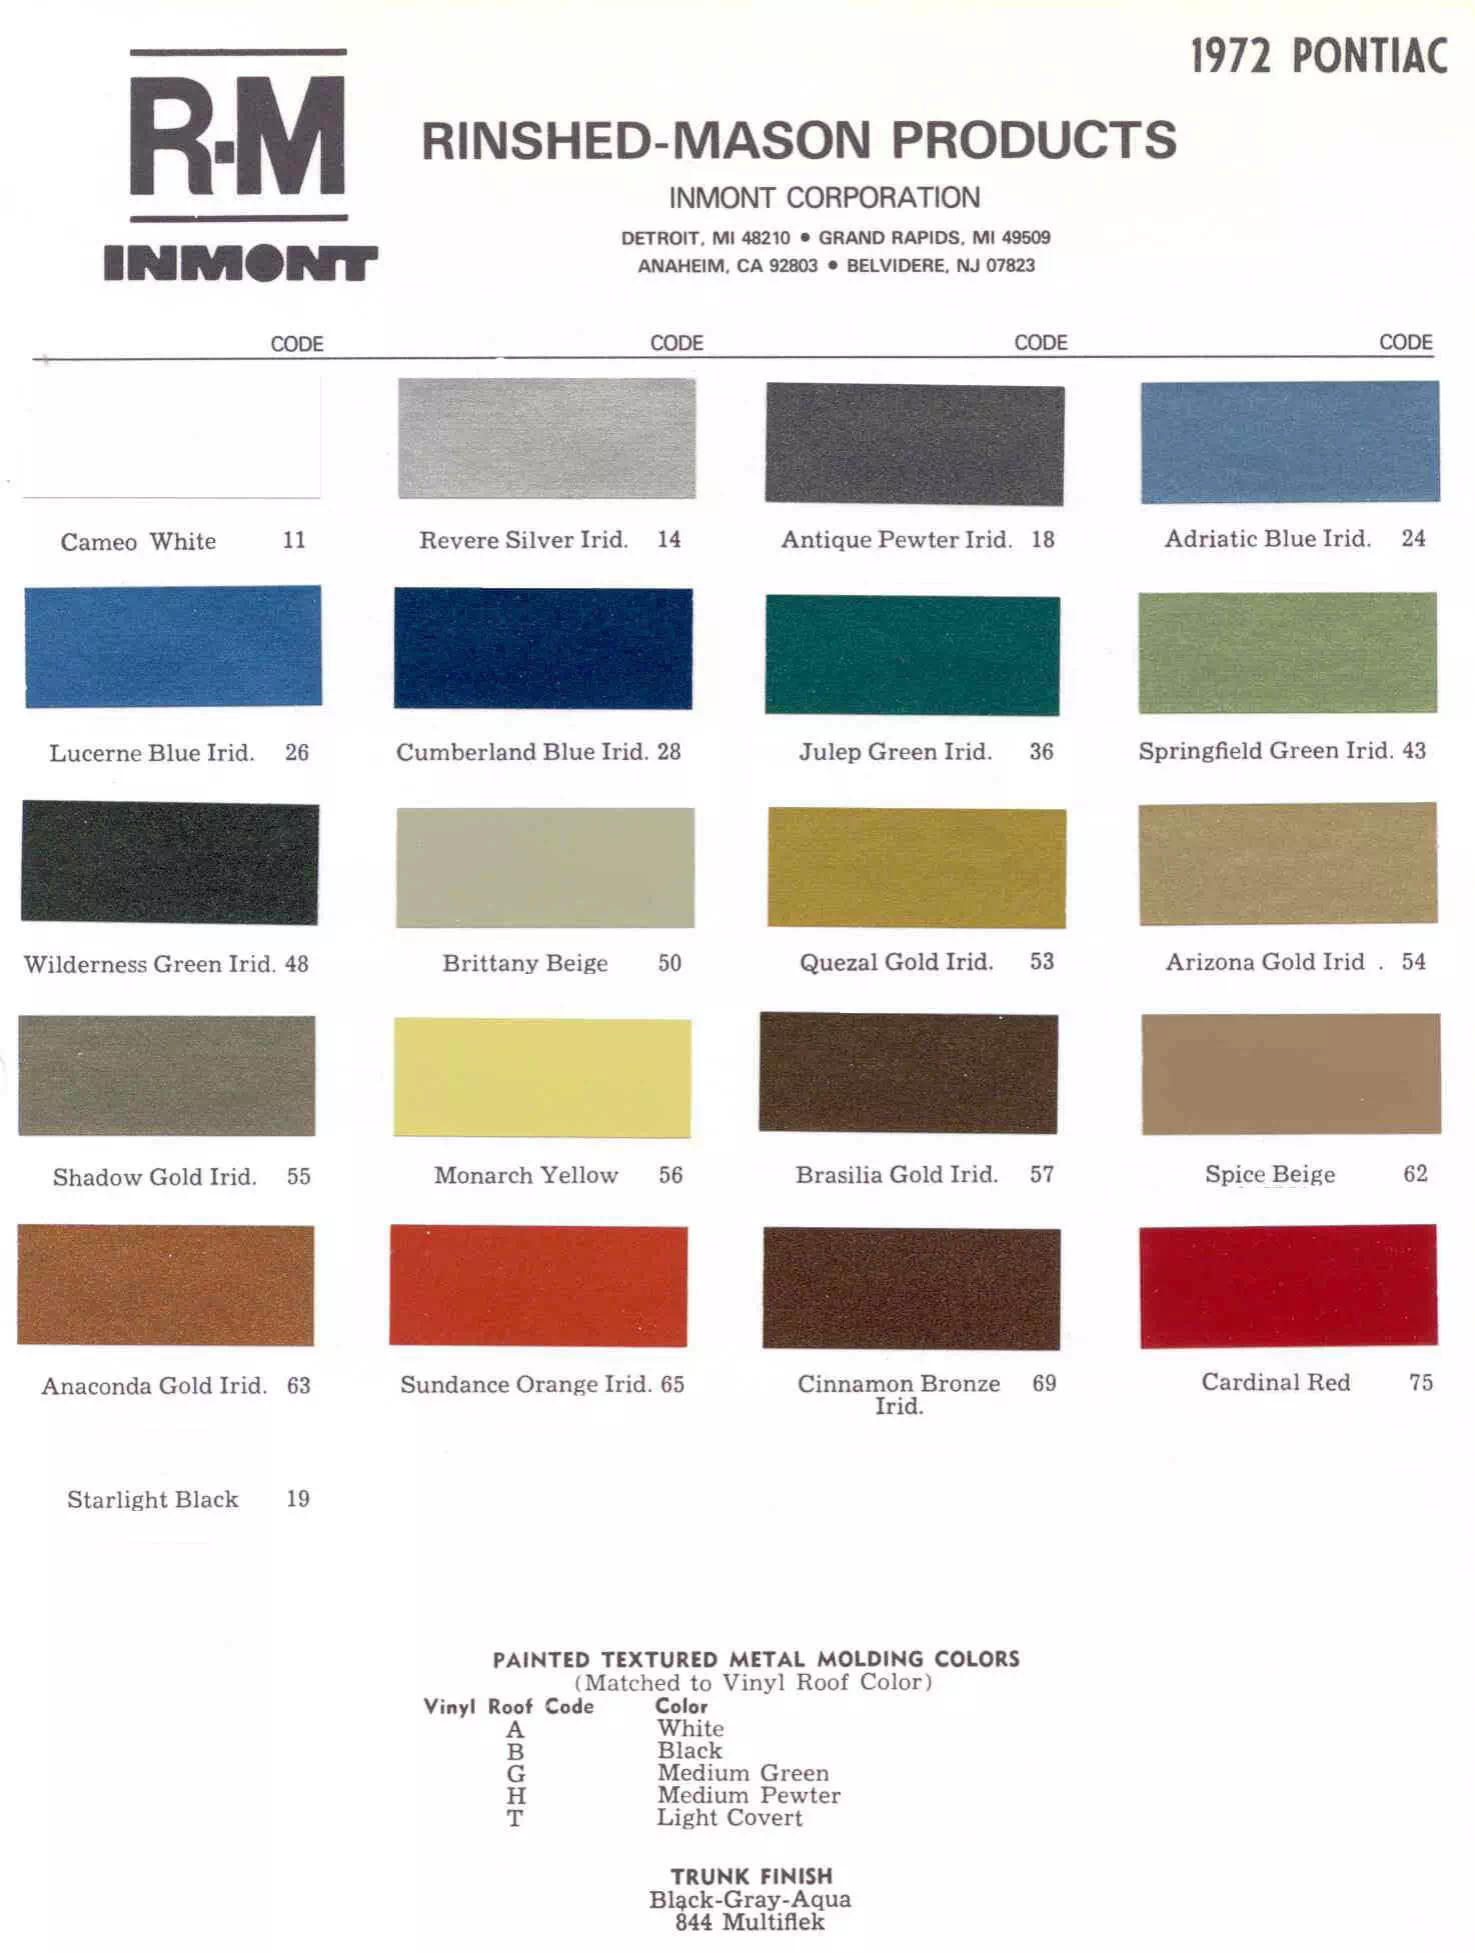 Color Codes and Color Swatch Examples of the Oem Paint from 1972